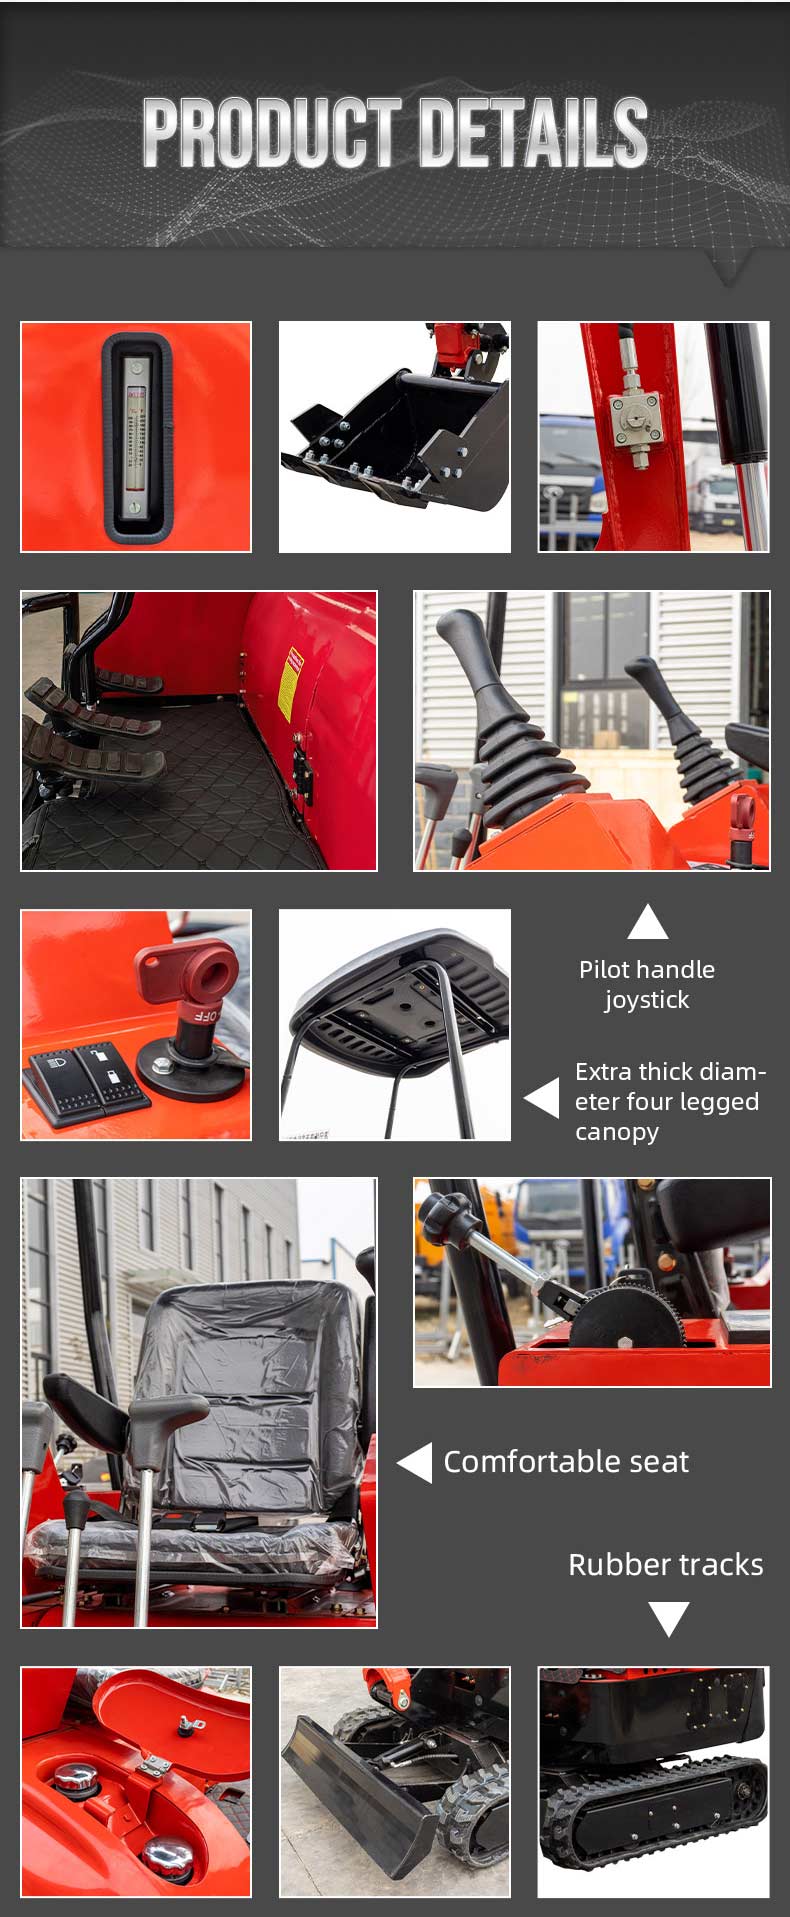 Small Excavator Manufacturer Earth Moving Machinery